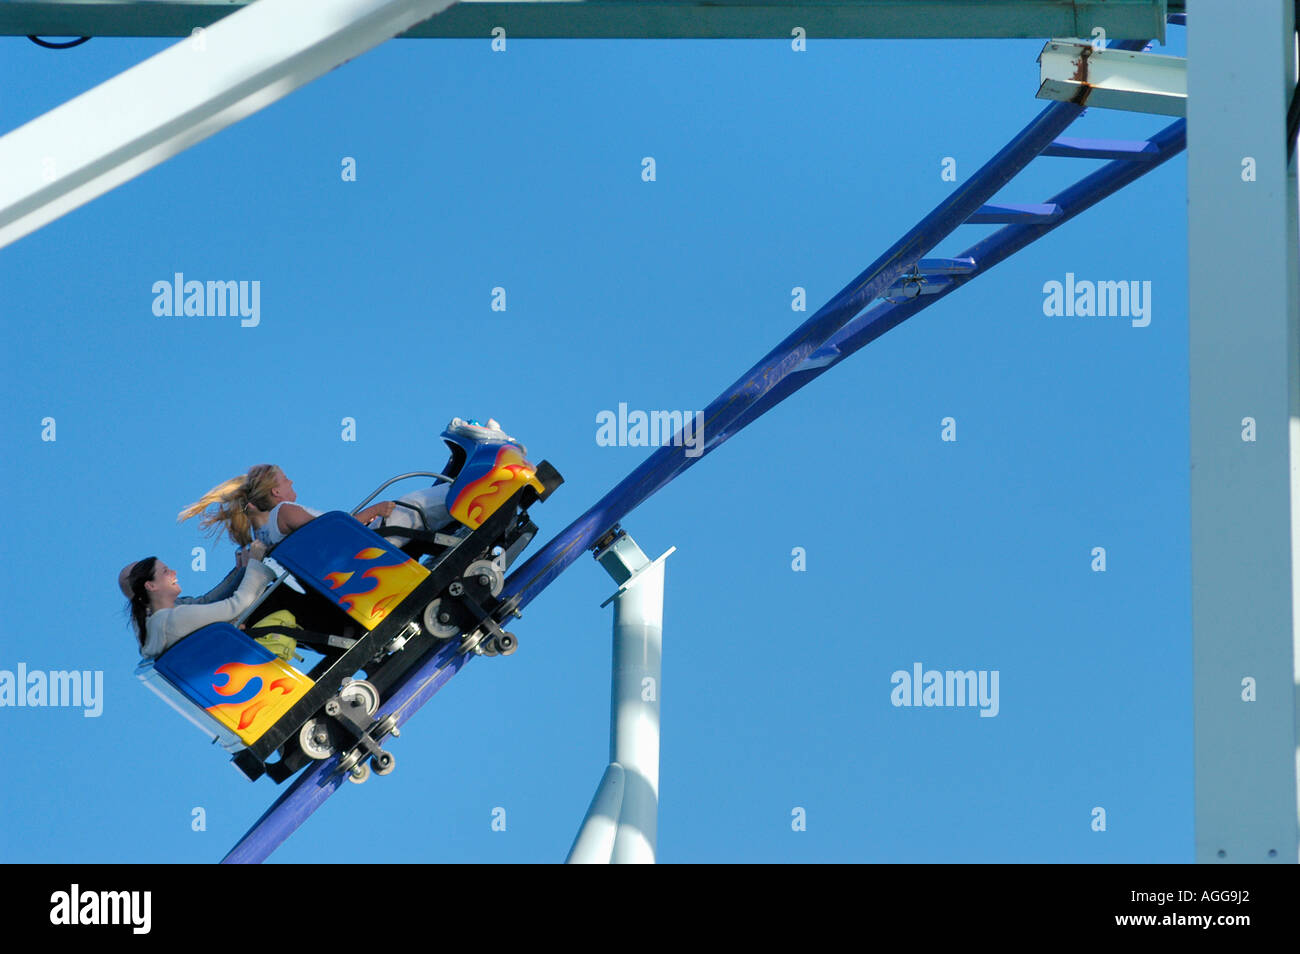 Rolocoaster In Amusement Park Stockholm Stock Photos & Rolocoaster ...